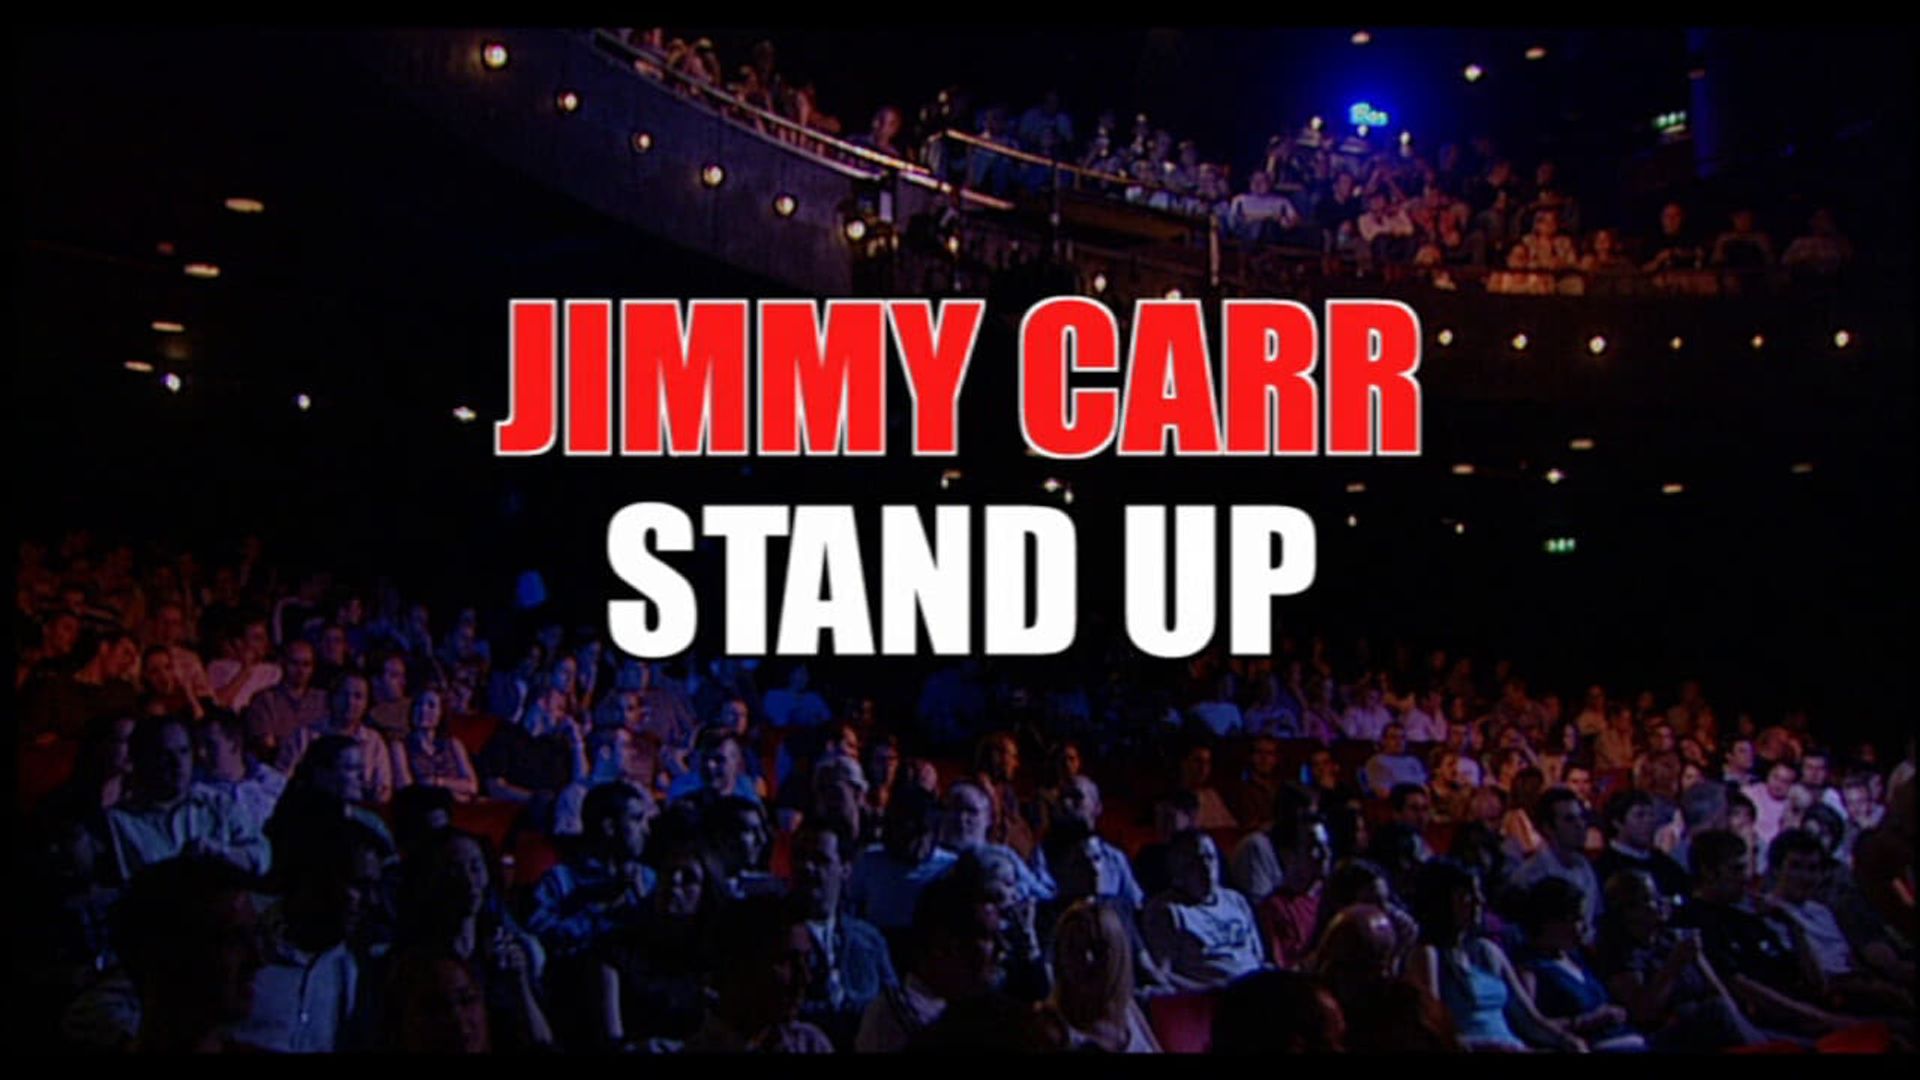 Jimmy Carr: Stand Up background